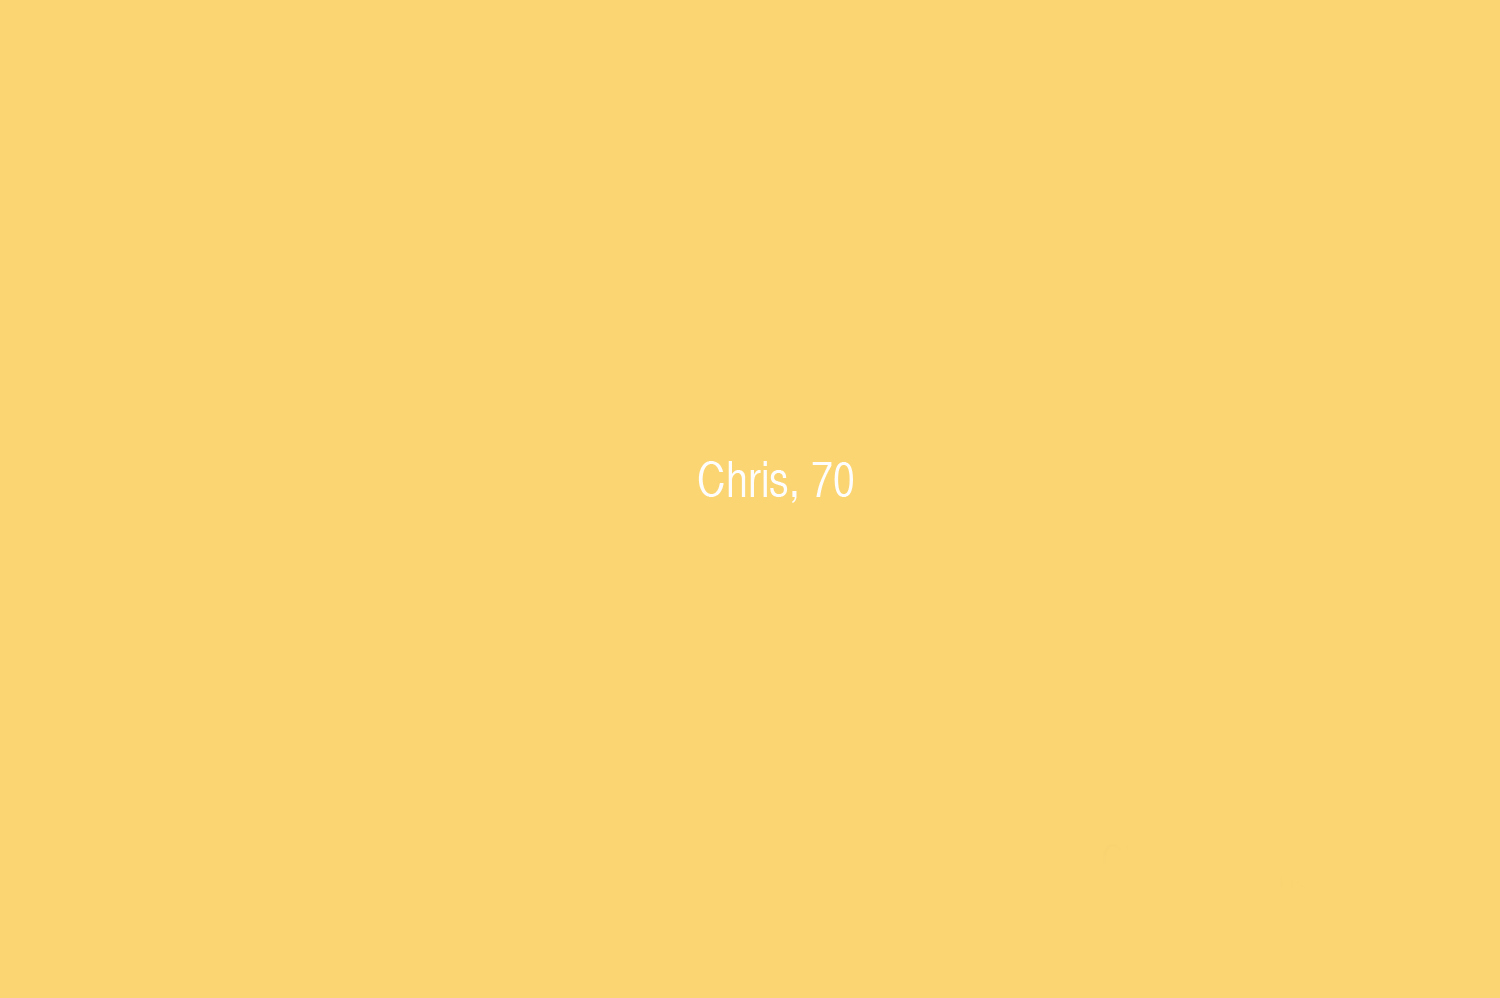 11.Chris_If_you_are_lucky_FN_1.jpg